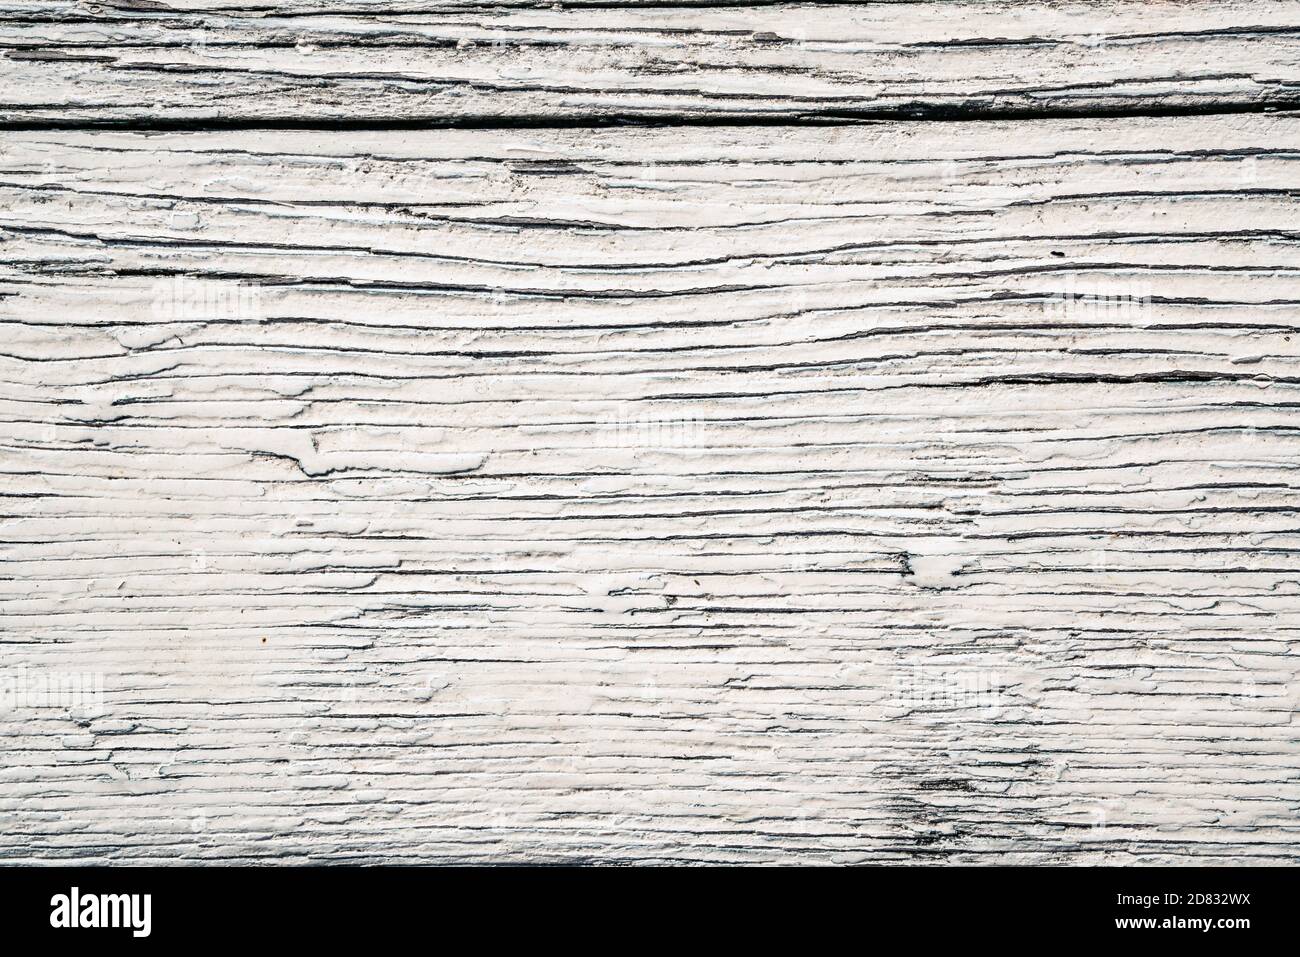 Milano -10/101/2020: wooden plank with peeling white paint Stock Photo